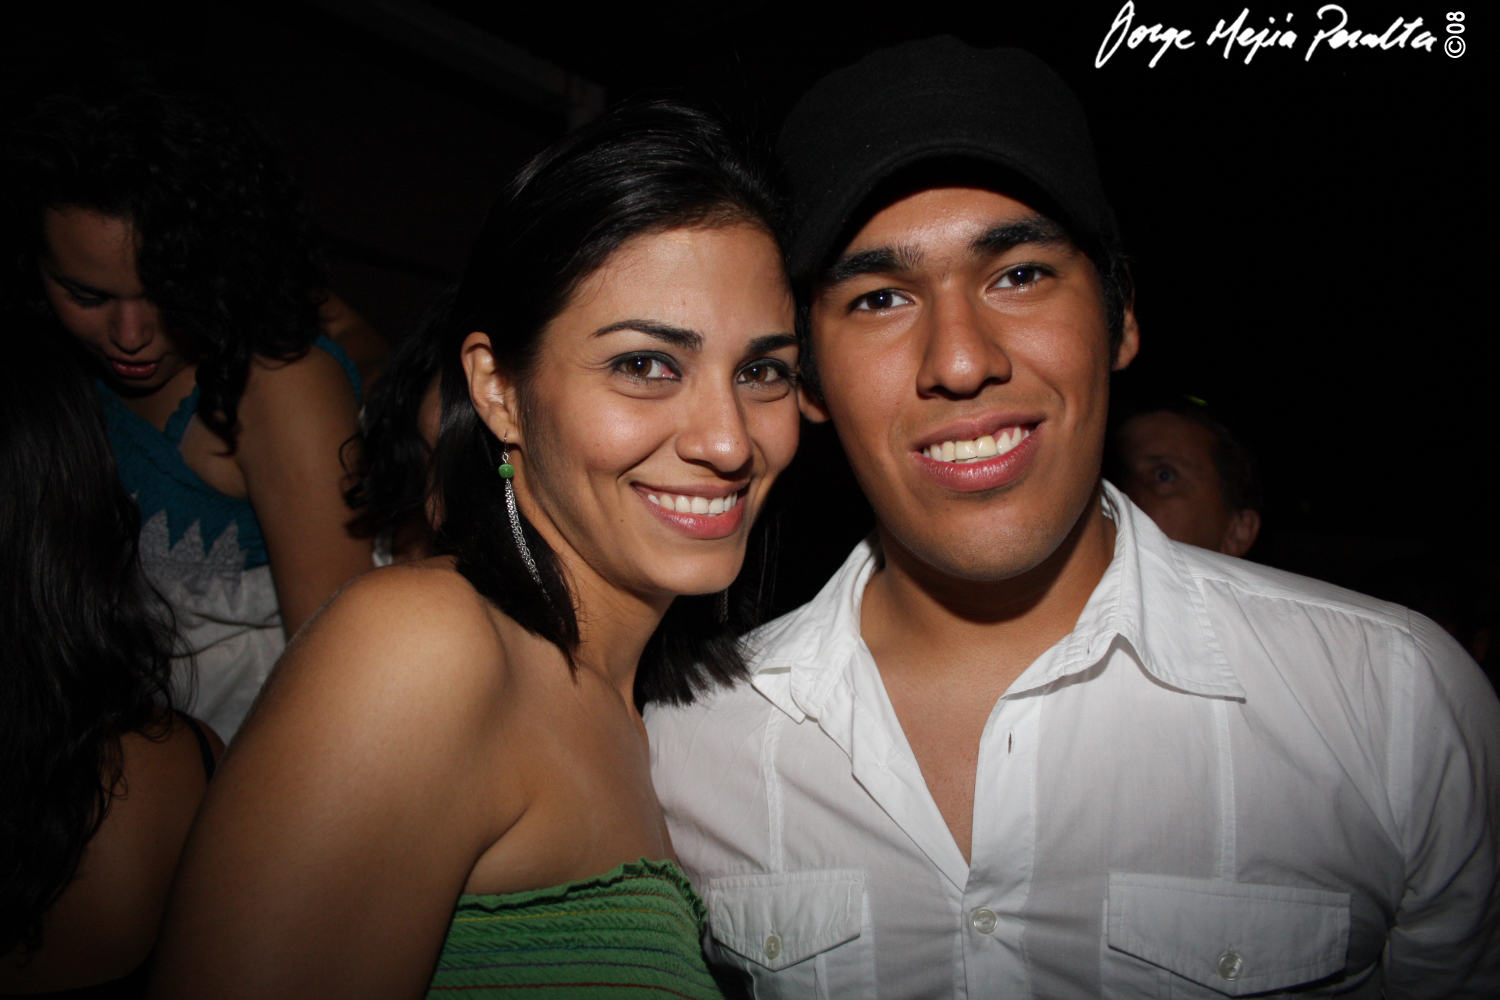 a man and woman smiling for the camera at a party